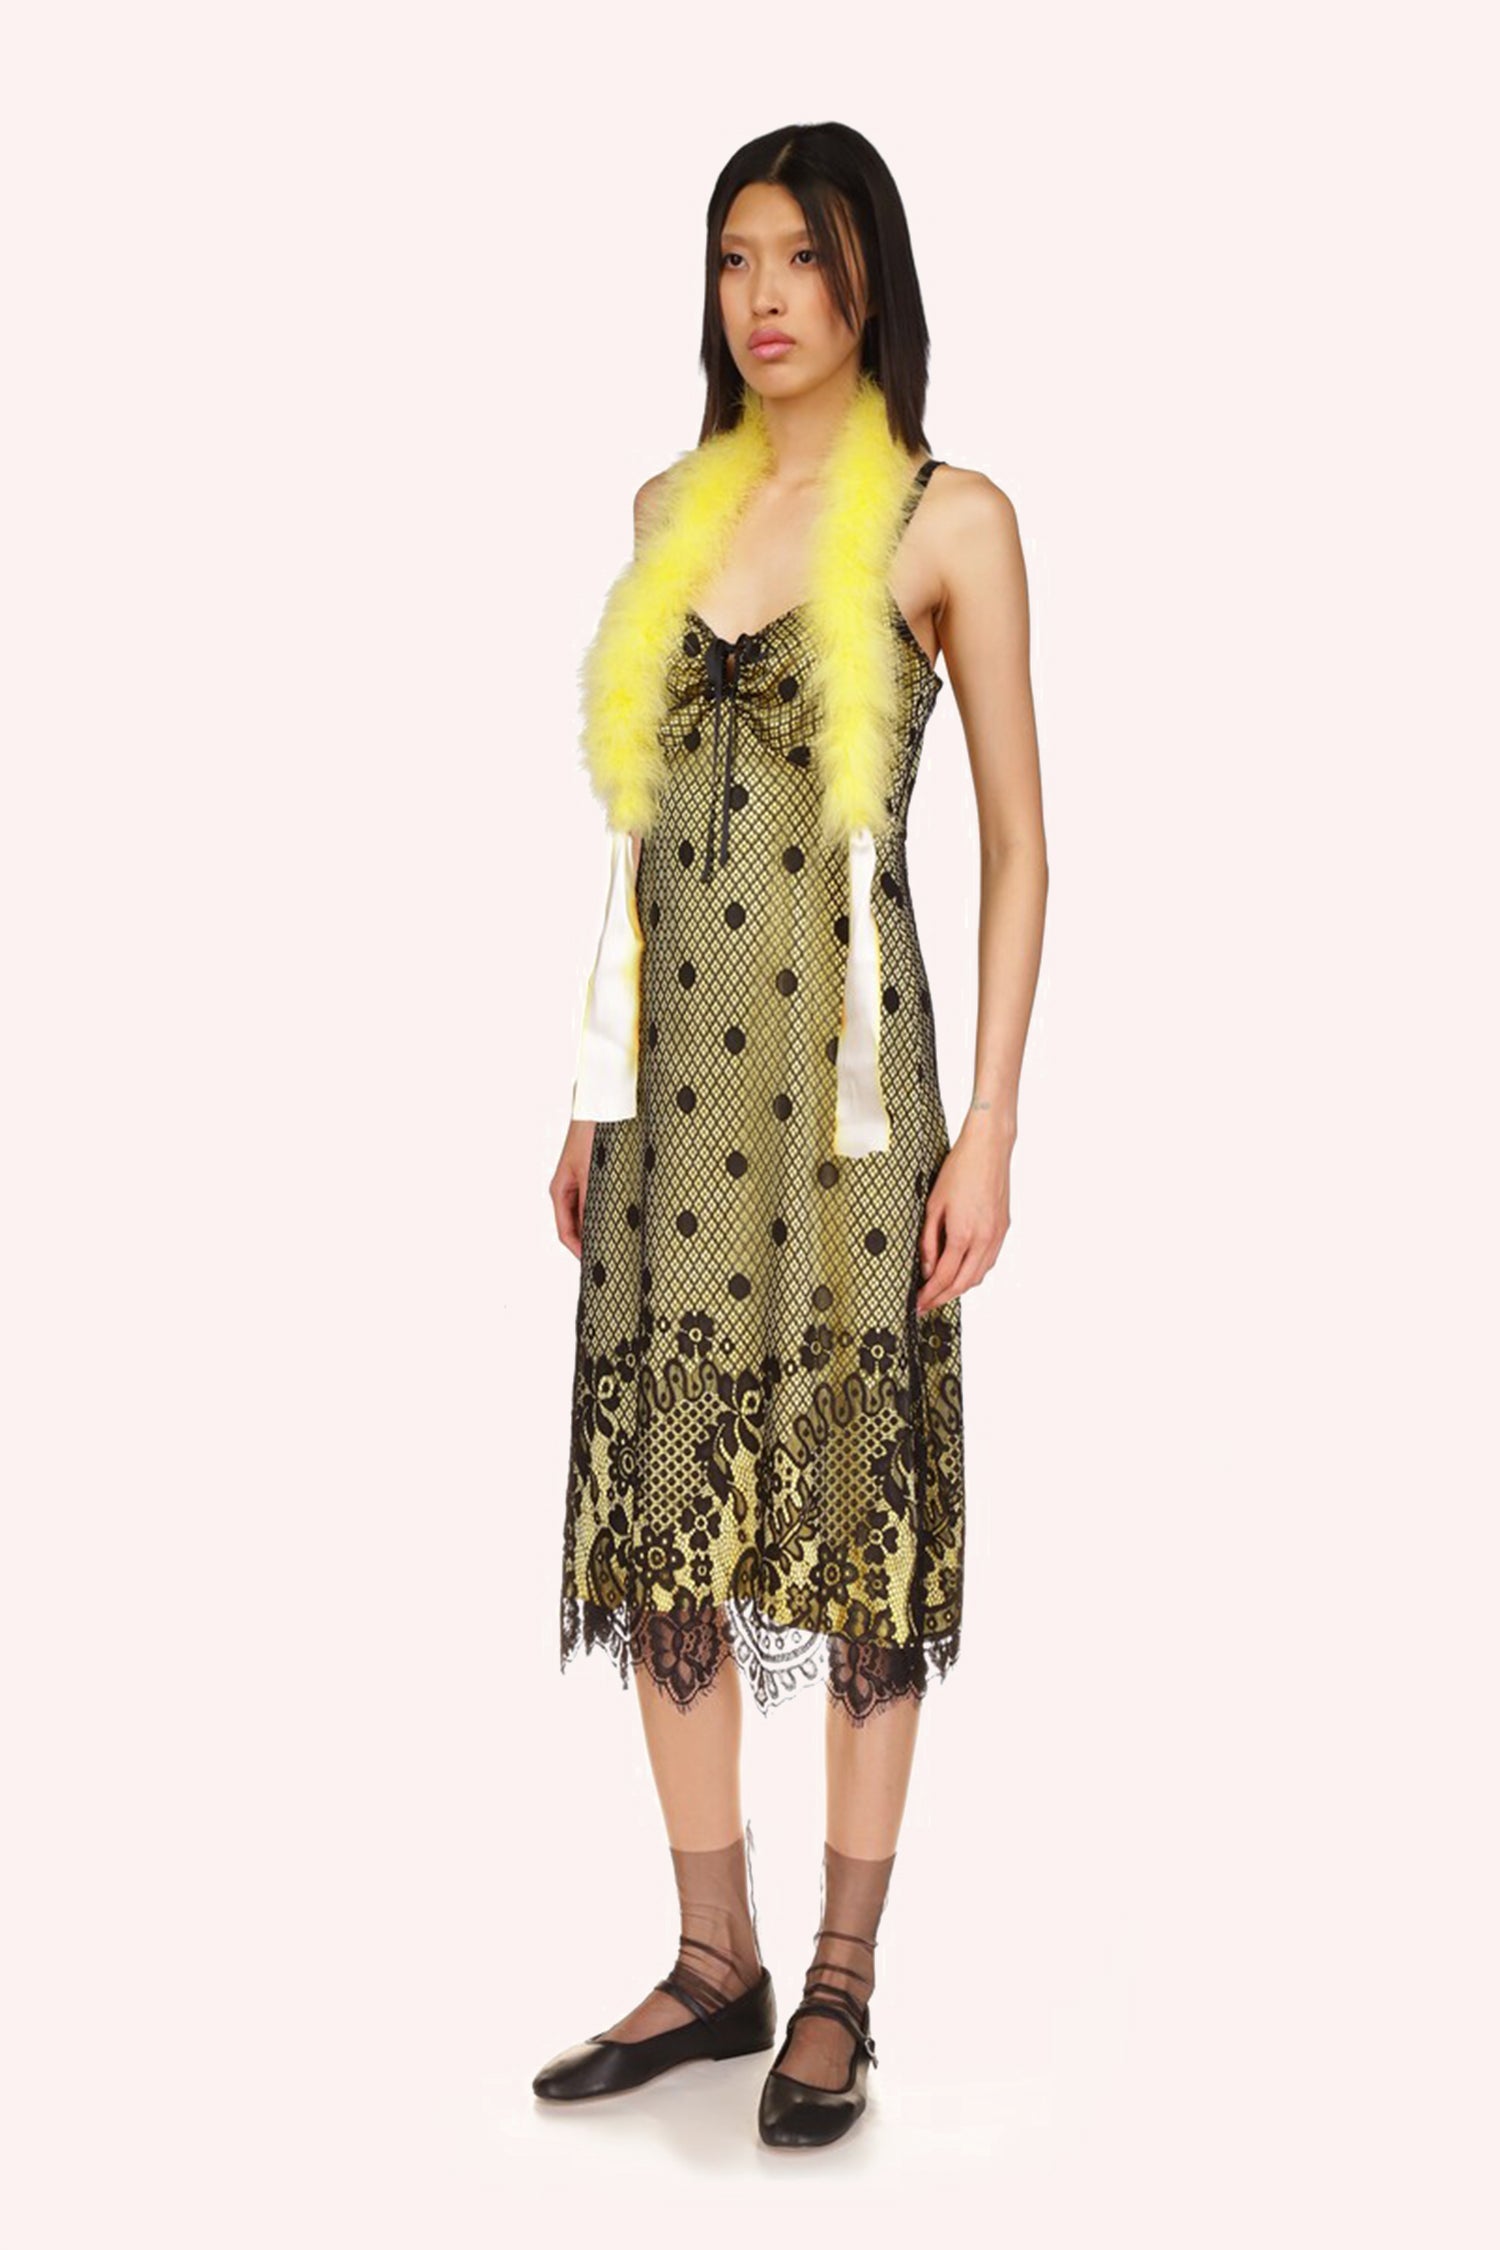 Washed Satin with Lace Dress Canary Yellow/Black, lace design is at the bottom, above black dots